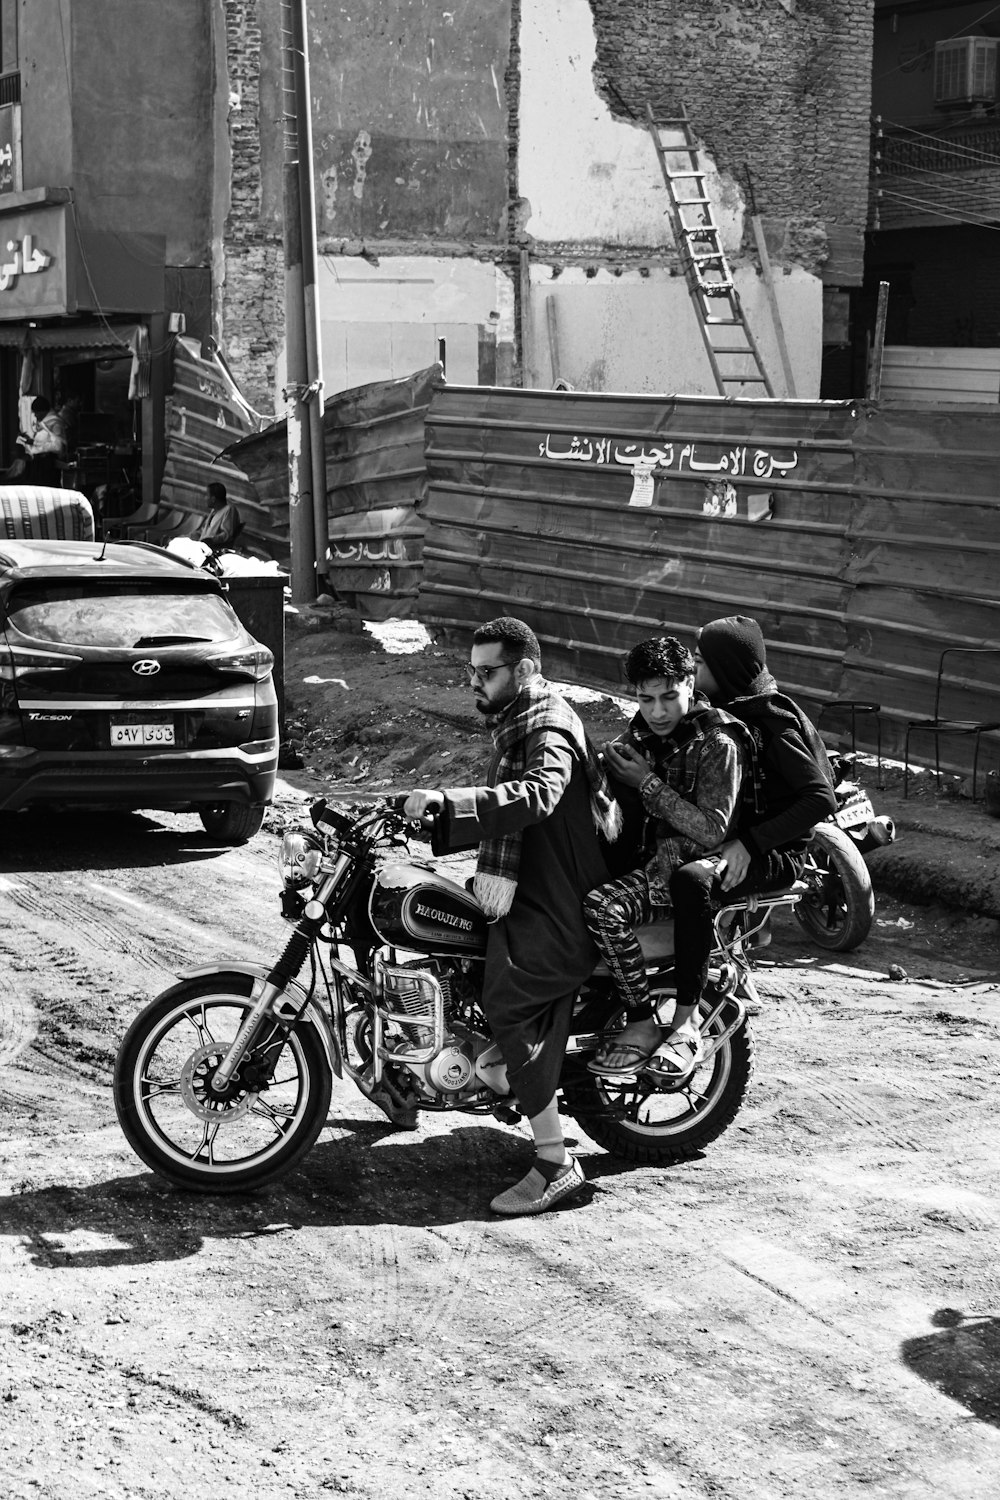 a group of people riding on the back of a motorcycle